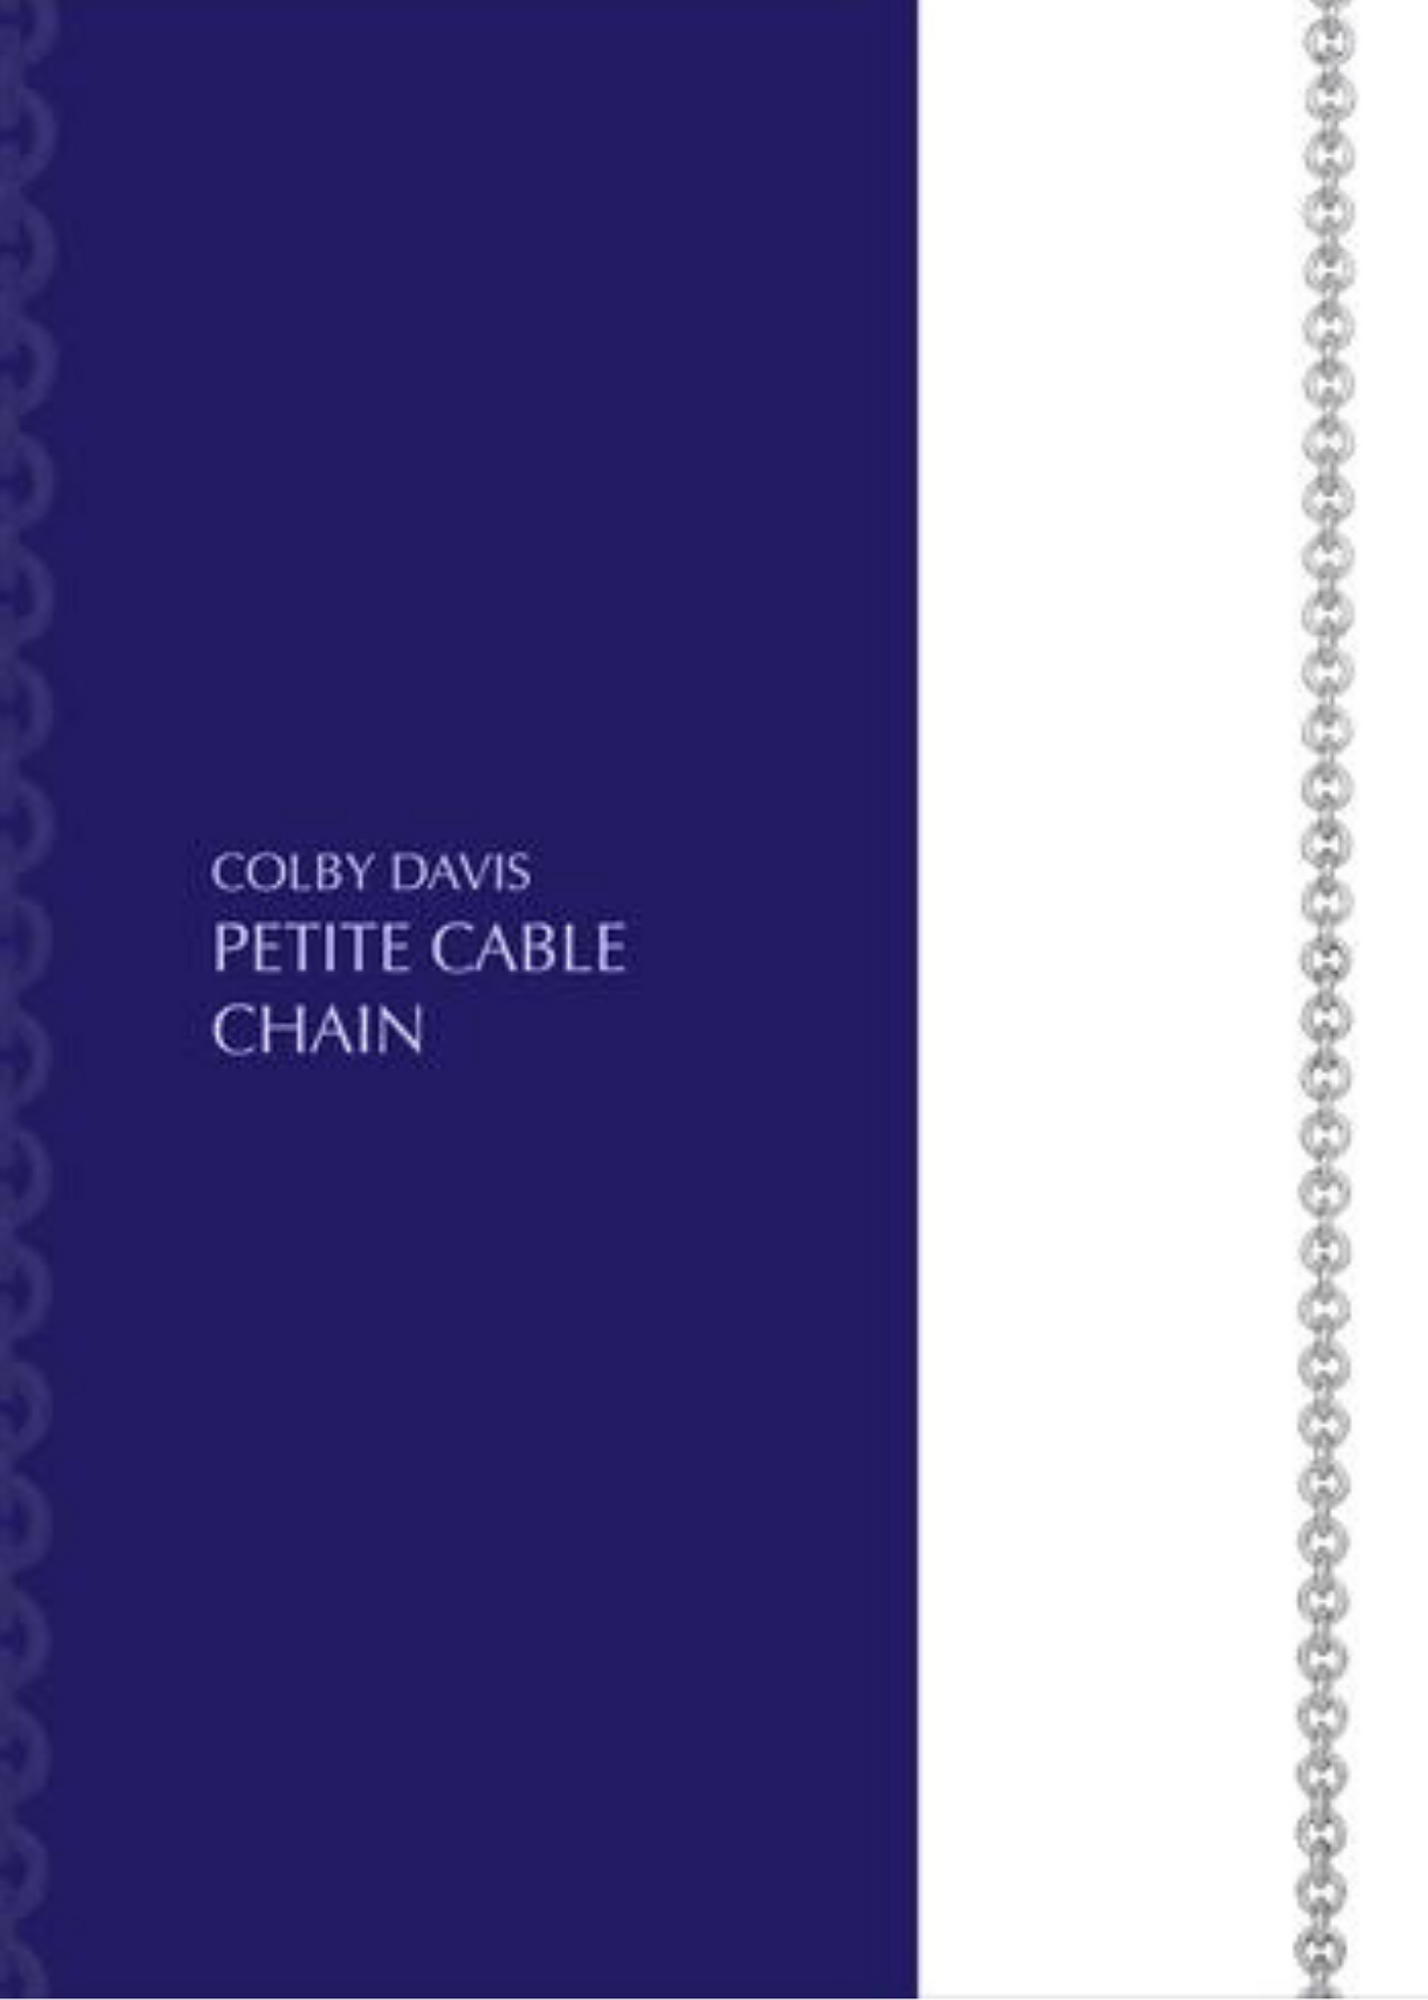 Colby Davis Chain: Petite Cable